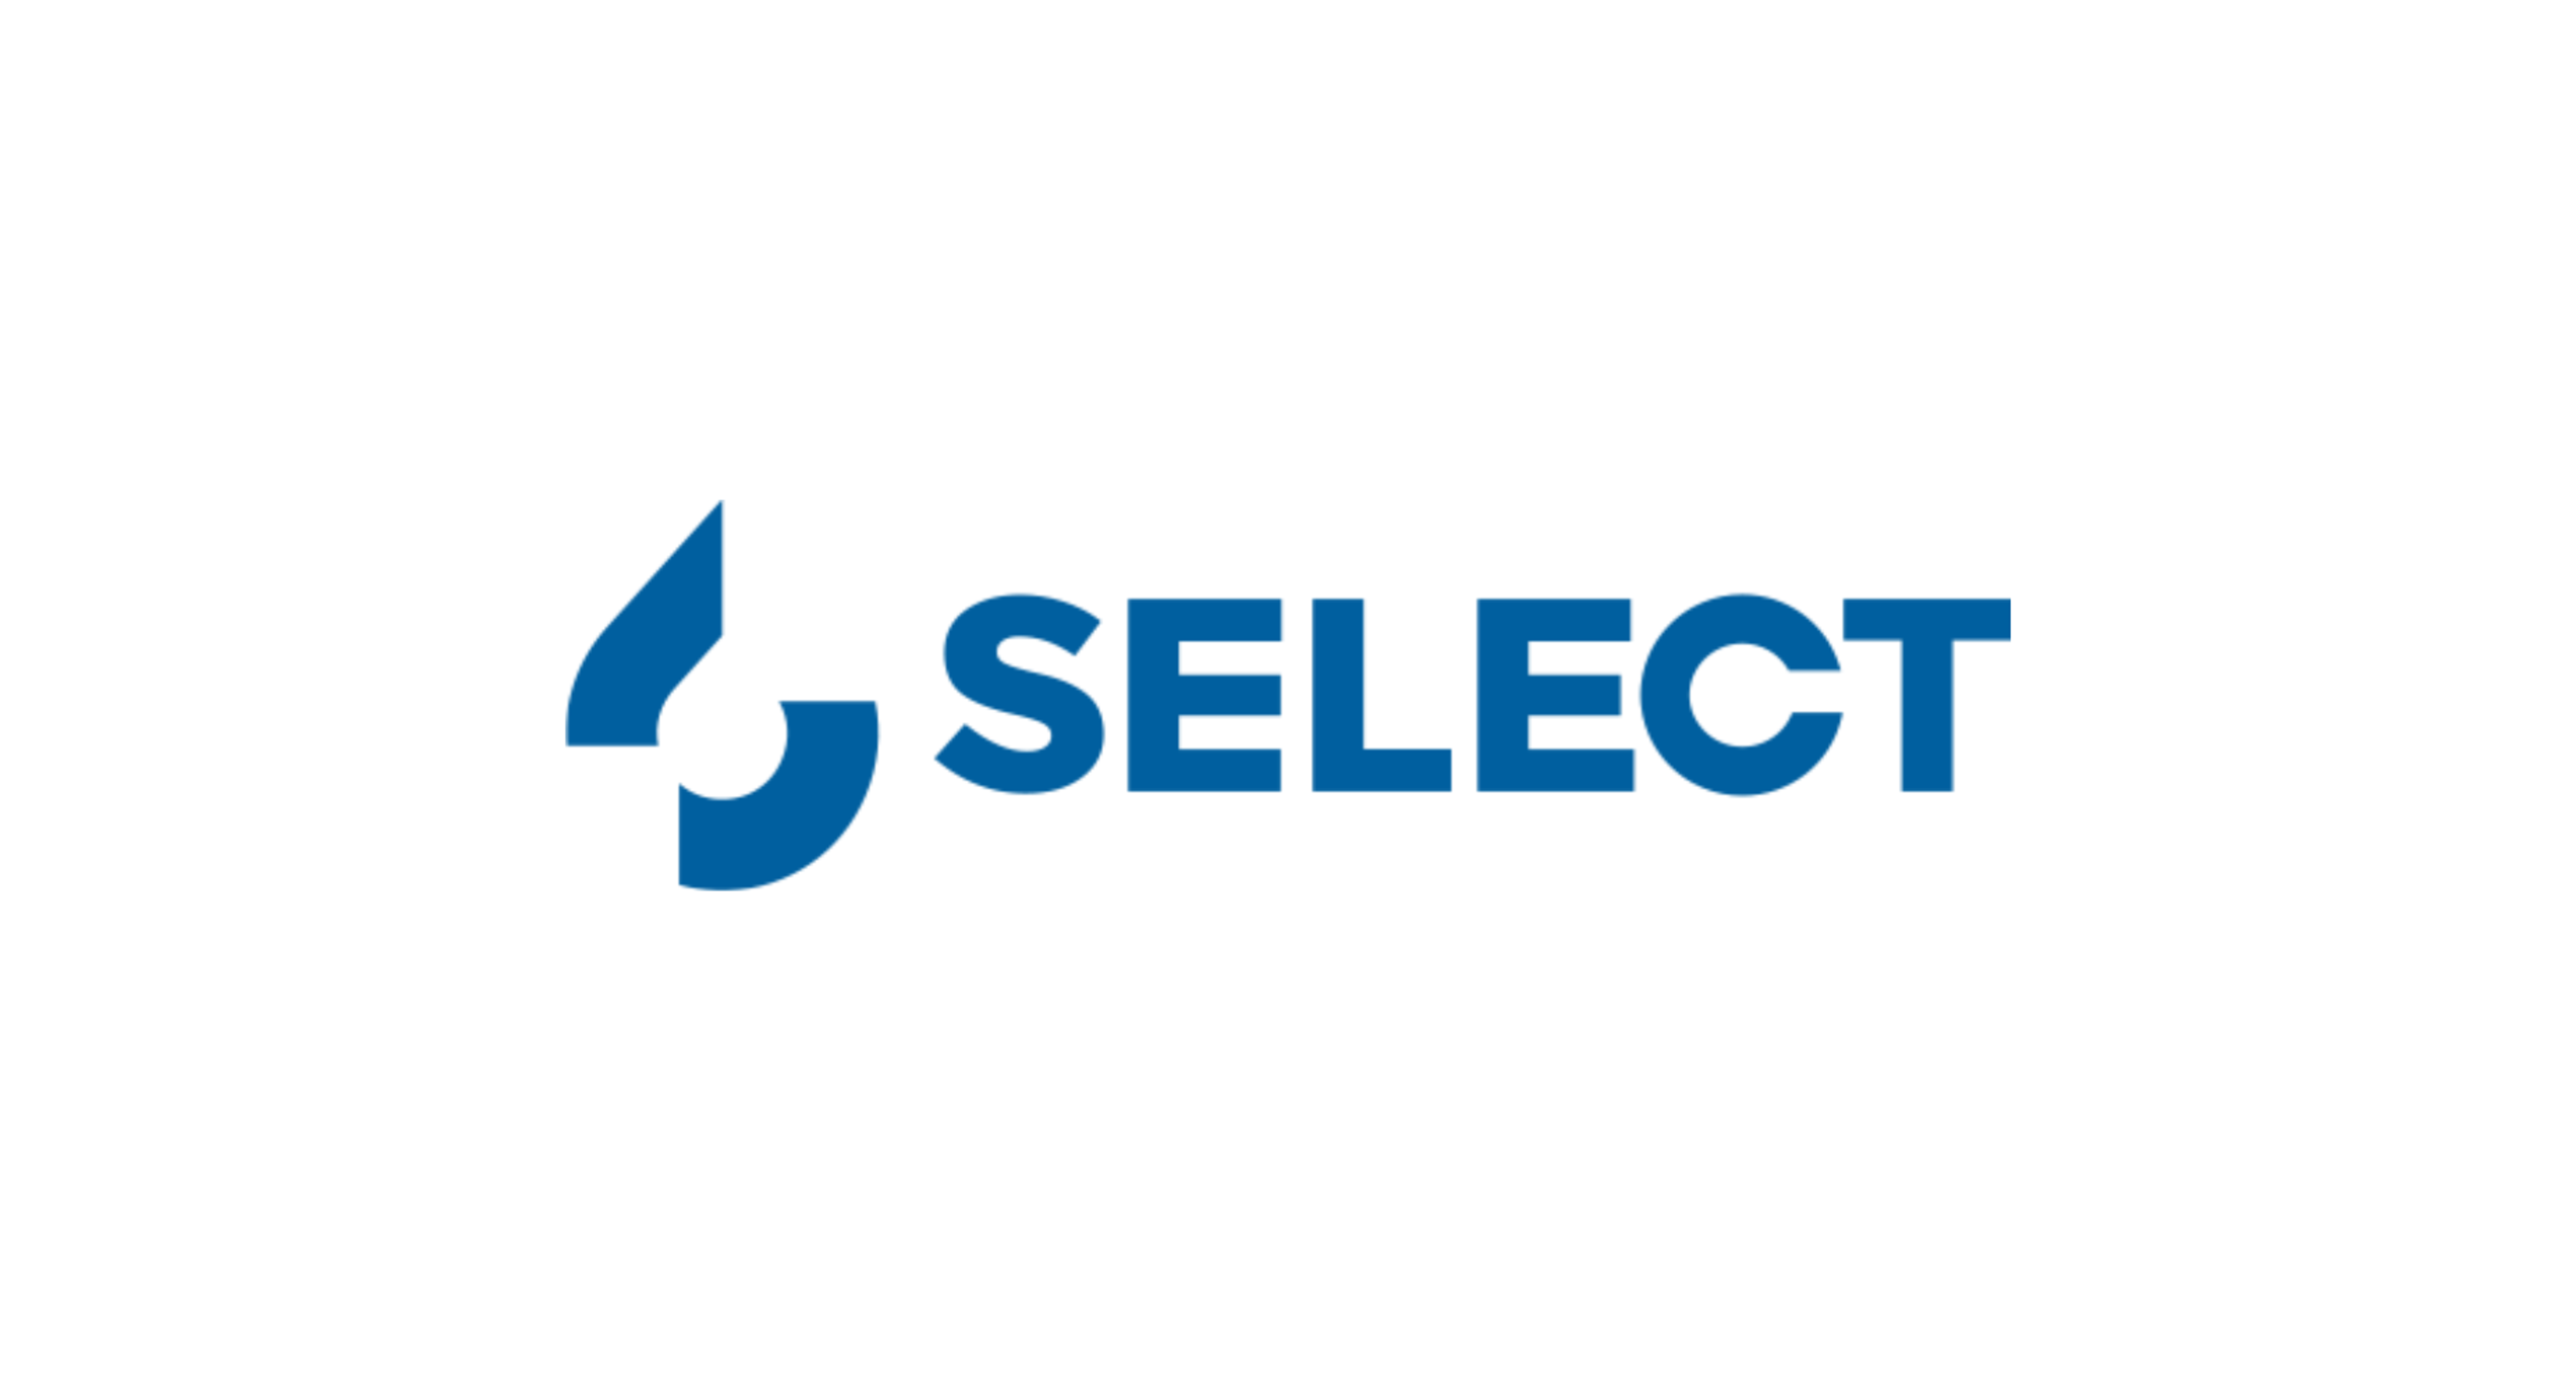 Select Energy Services Is Trading At Meaningful Discount To Water Oriented Peers, Marking Attractive Entry Point, Says Analyst